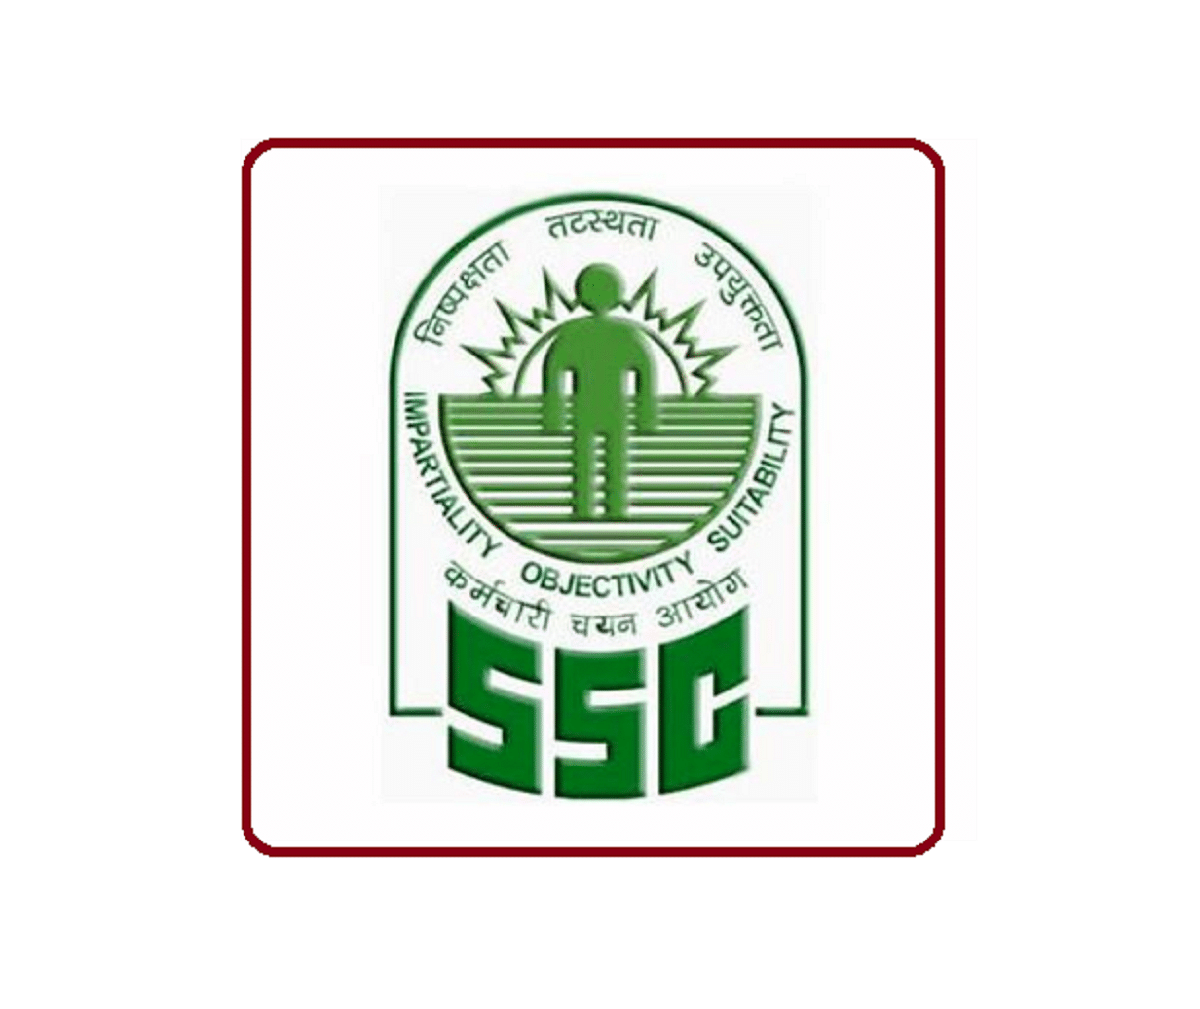 SSC CGL Tier 2 Answer Key 2022: Last Date to Raise Objections Extended Till February 17, Know Steps Here